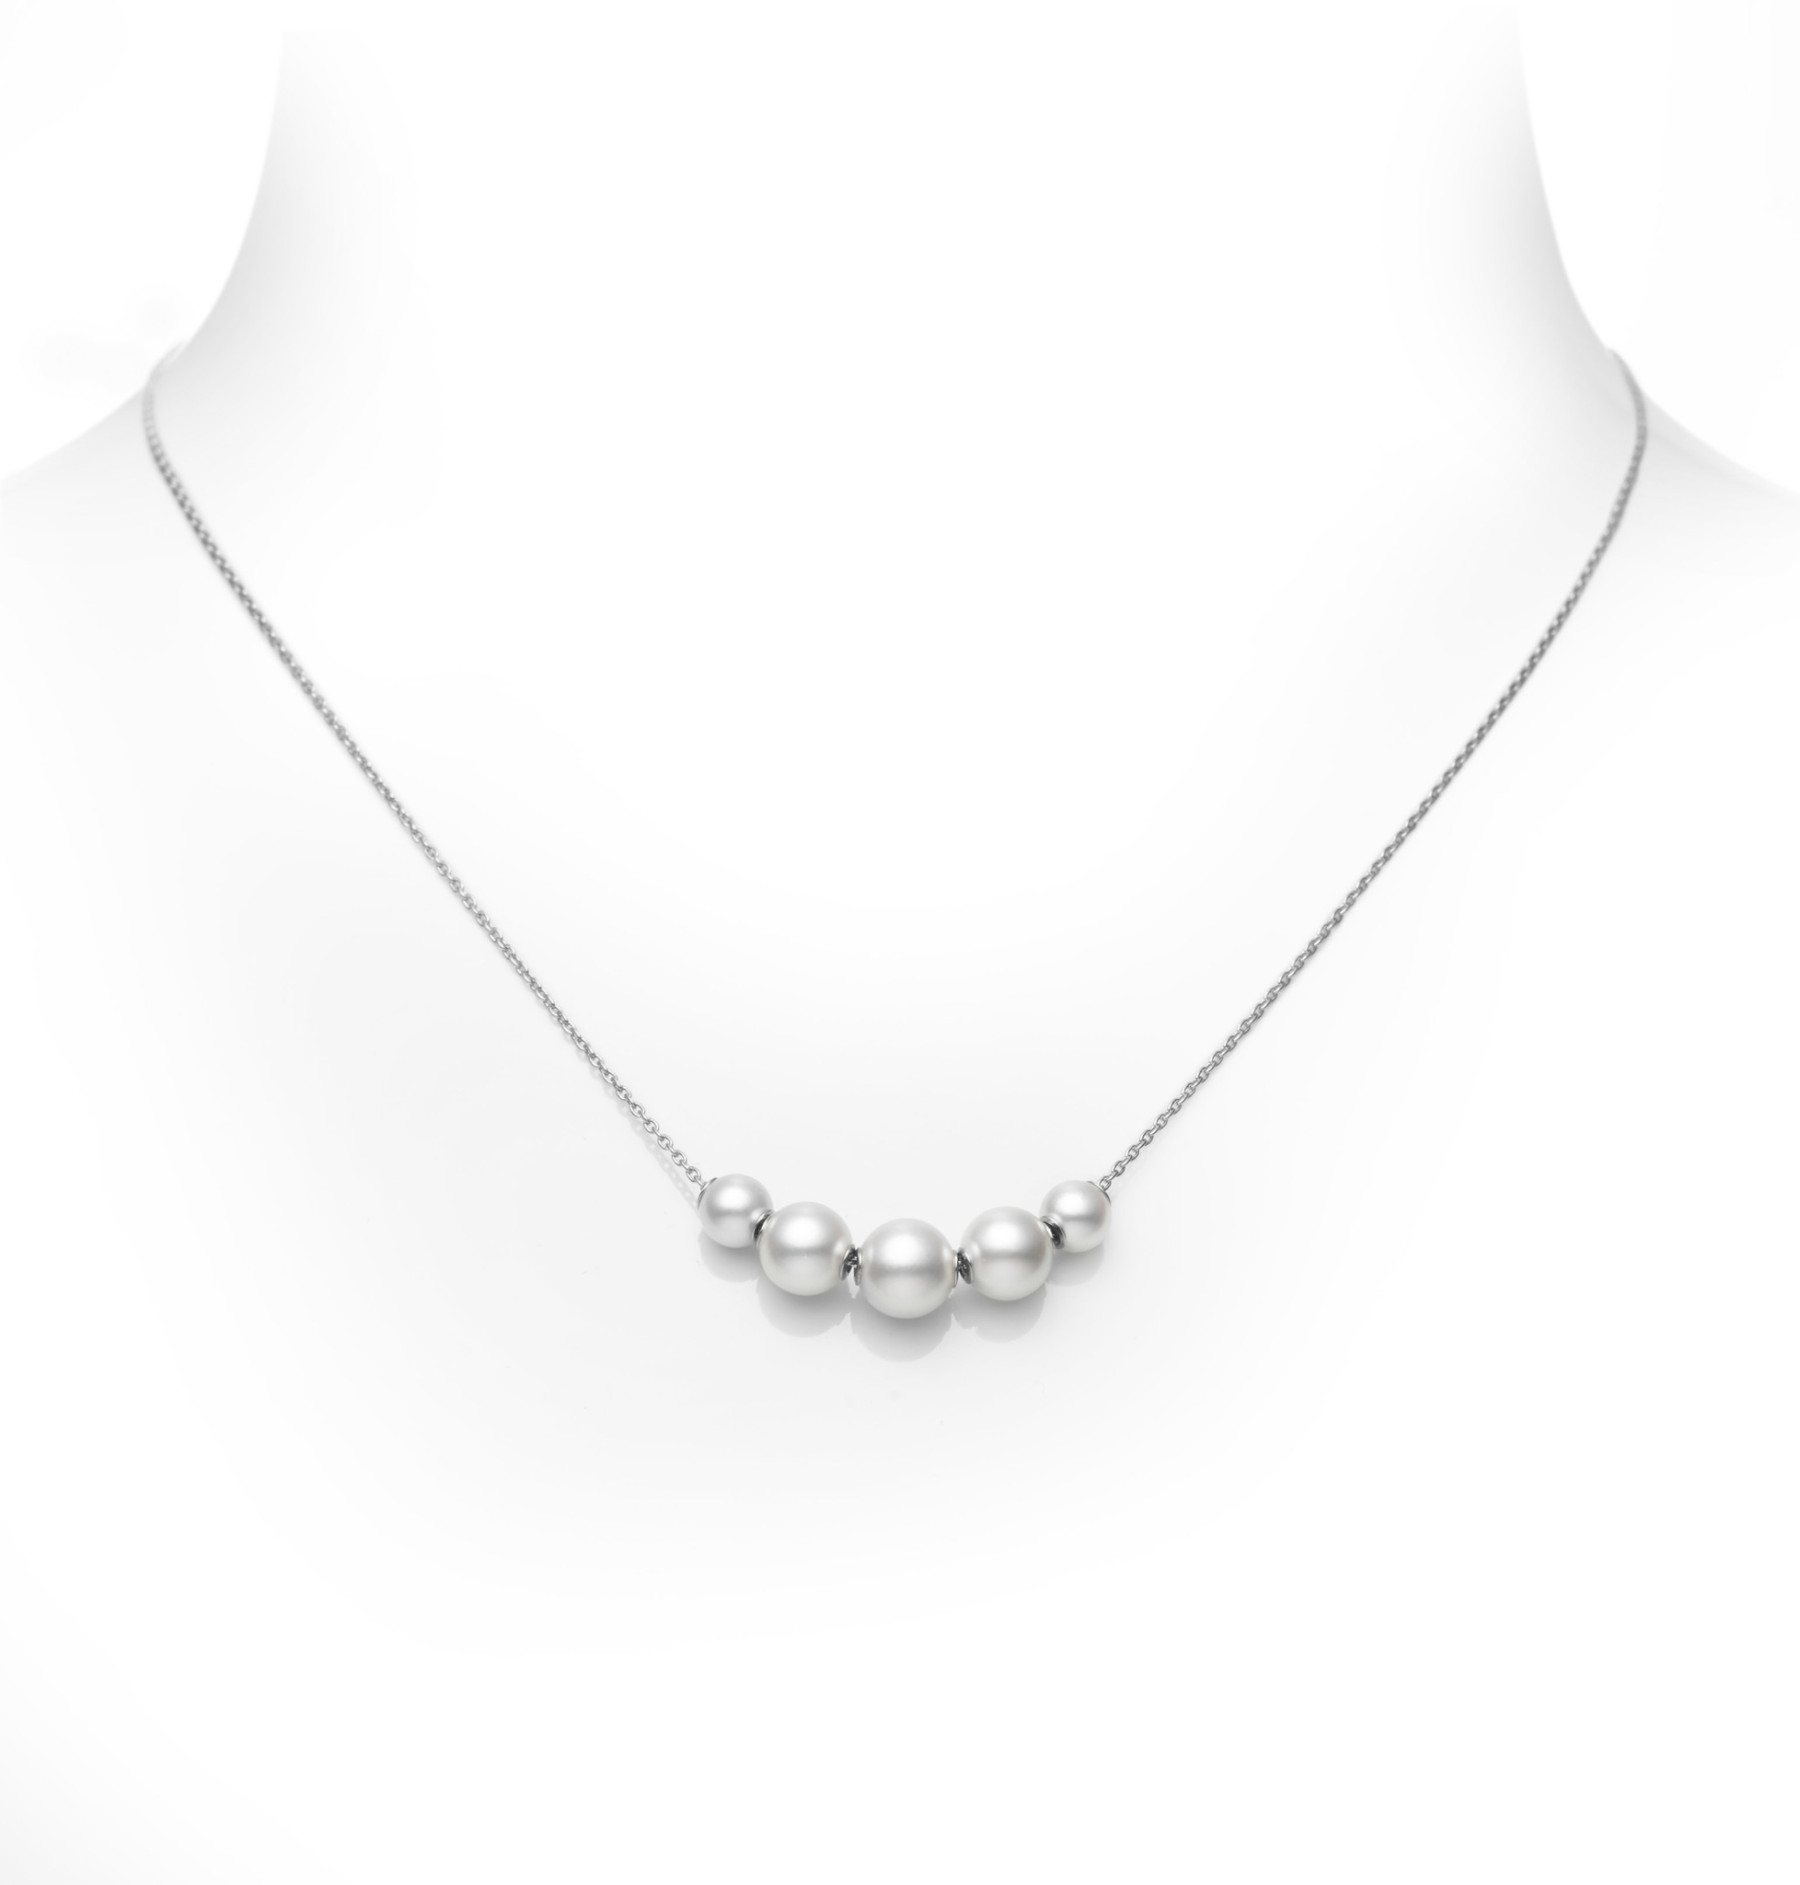 Mikimoto Five Pearl Station Necklace in White Gold 